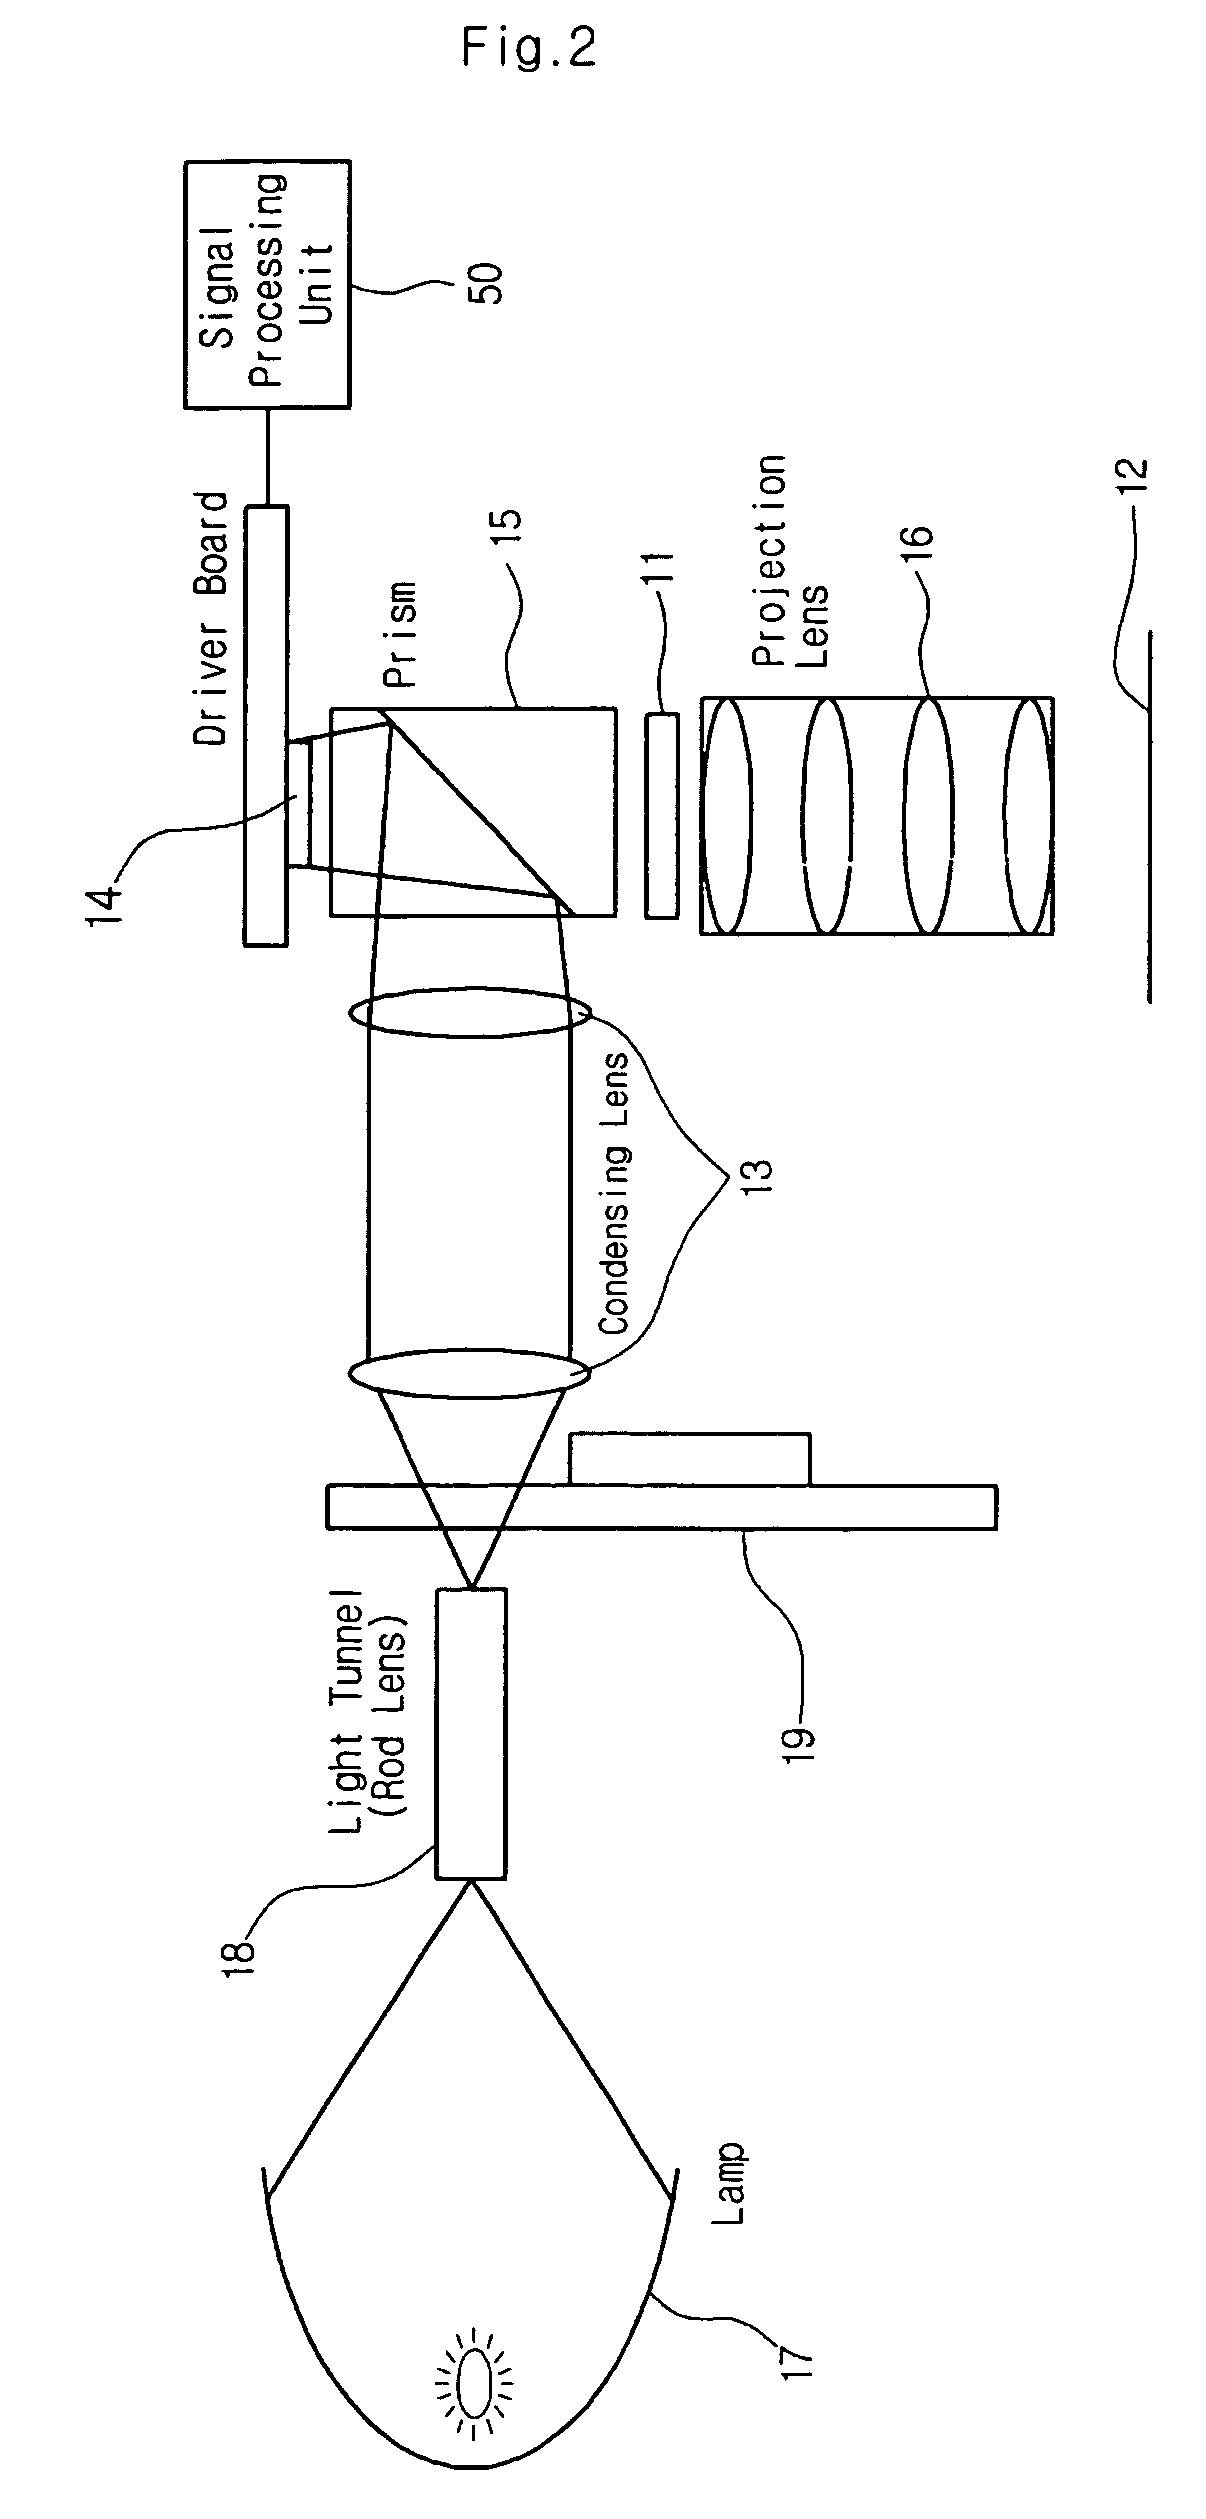 Display device having resolution improving apparatus for project-type display device